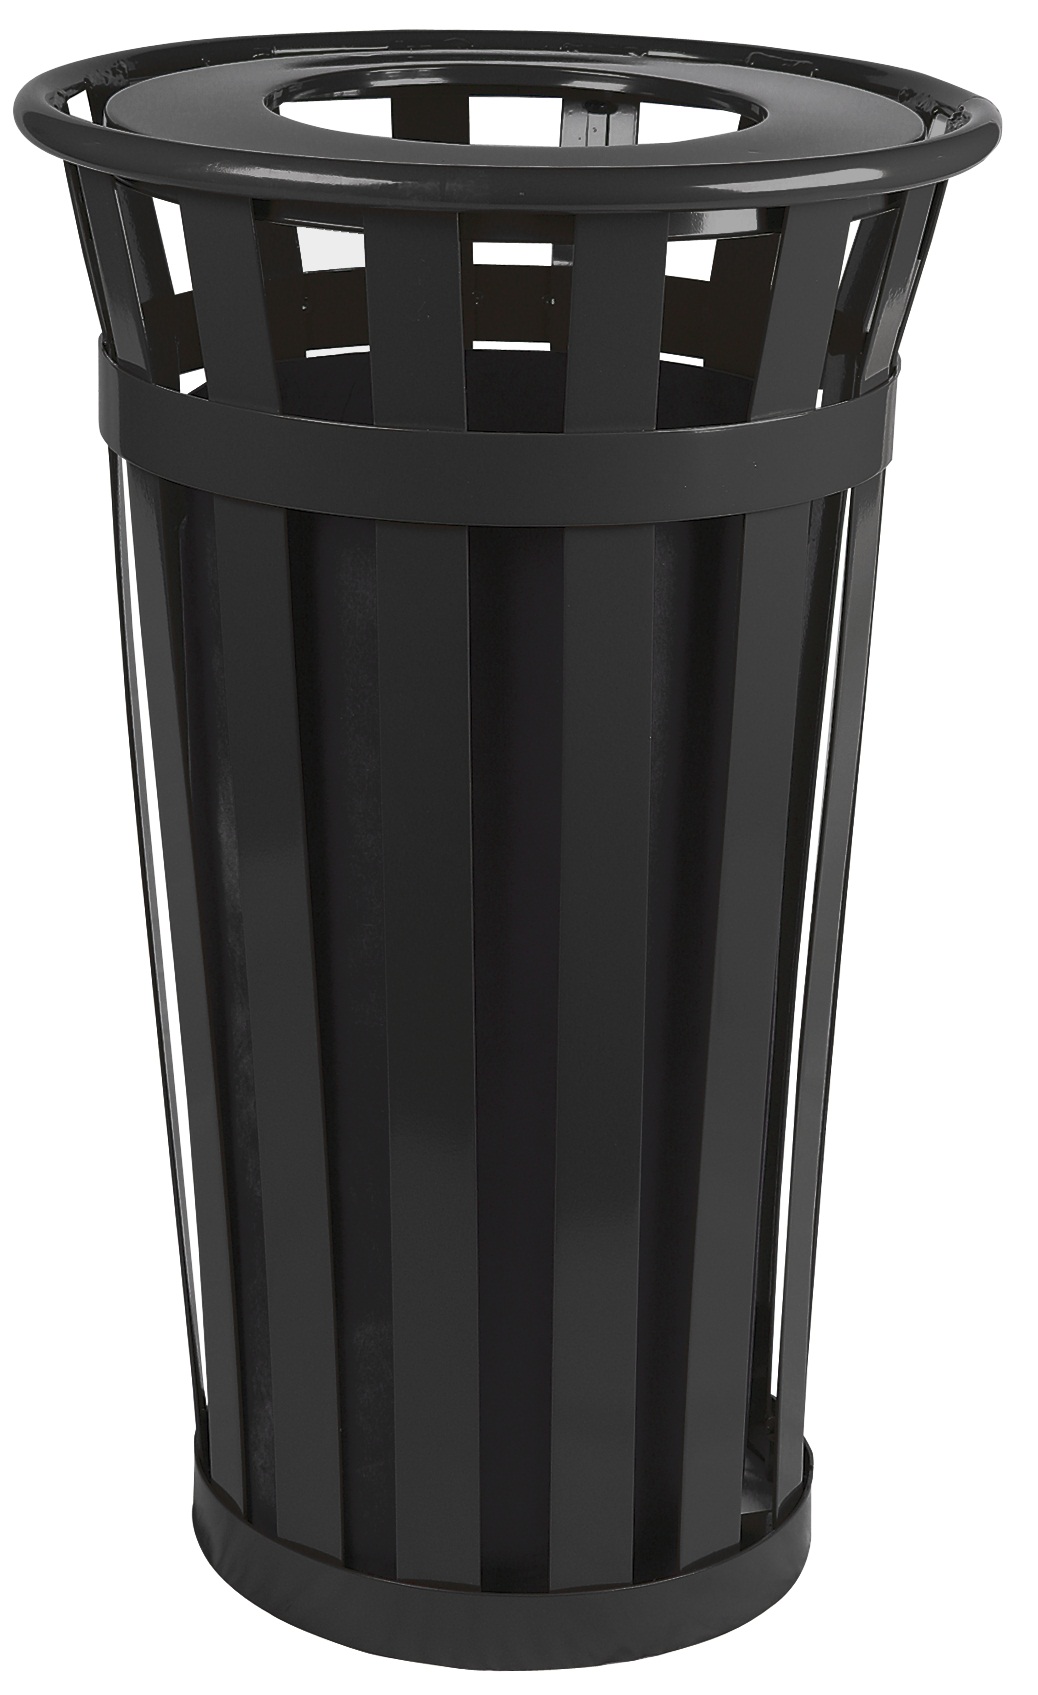 Trash receptacle with flat top, Outdoor 